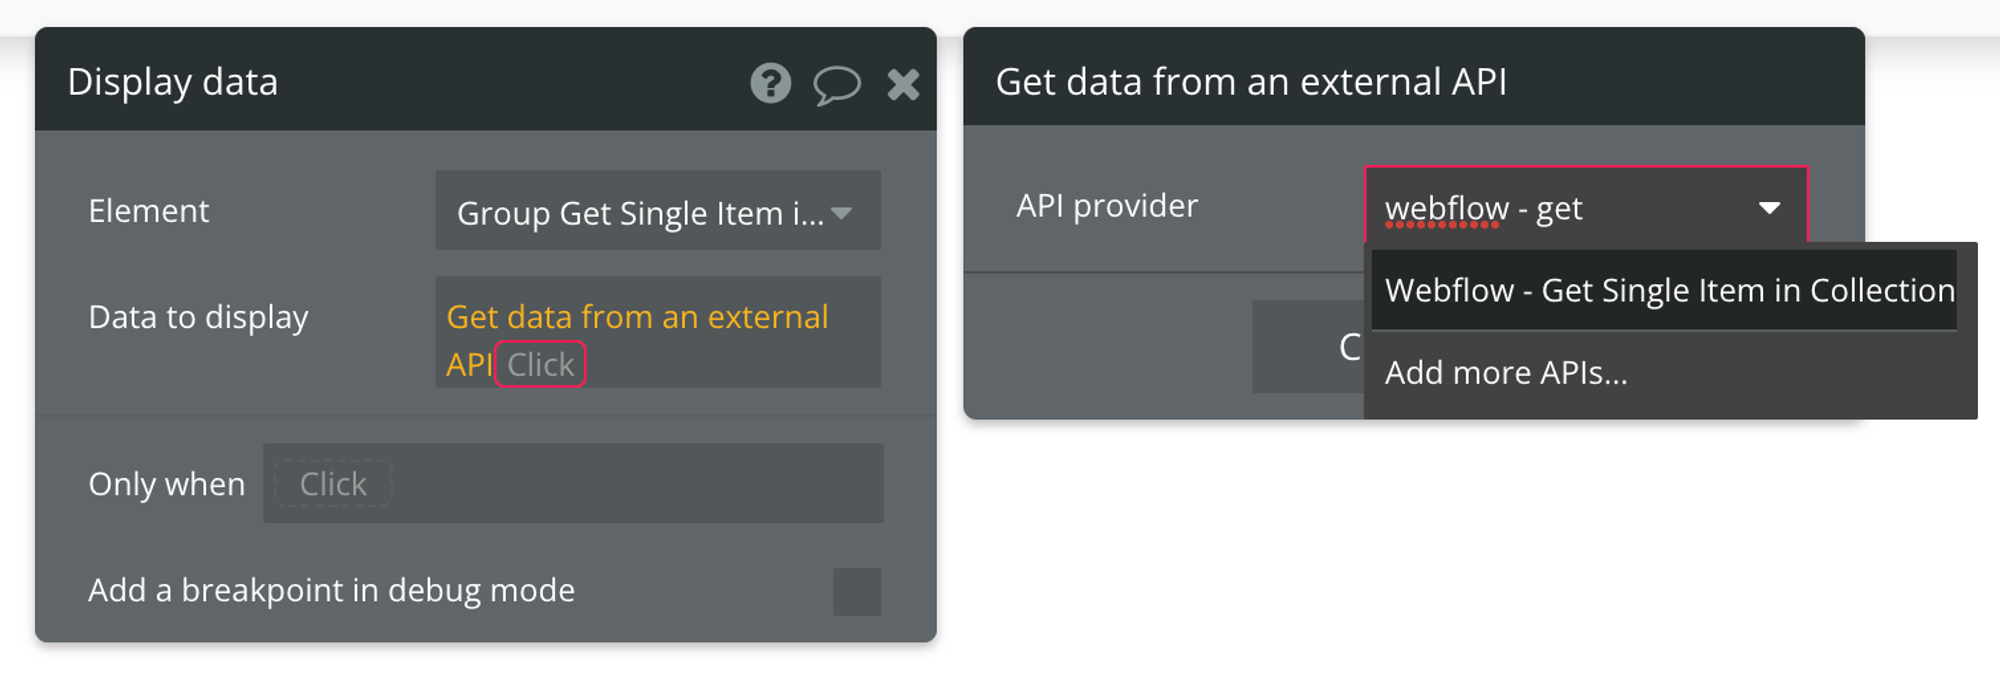 Select "Get data from external API" from the list of data sources, then find Webflow - Get Single Item in Collection from the list of API providers